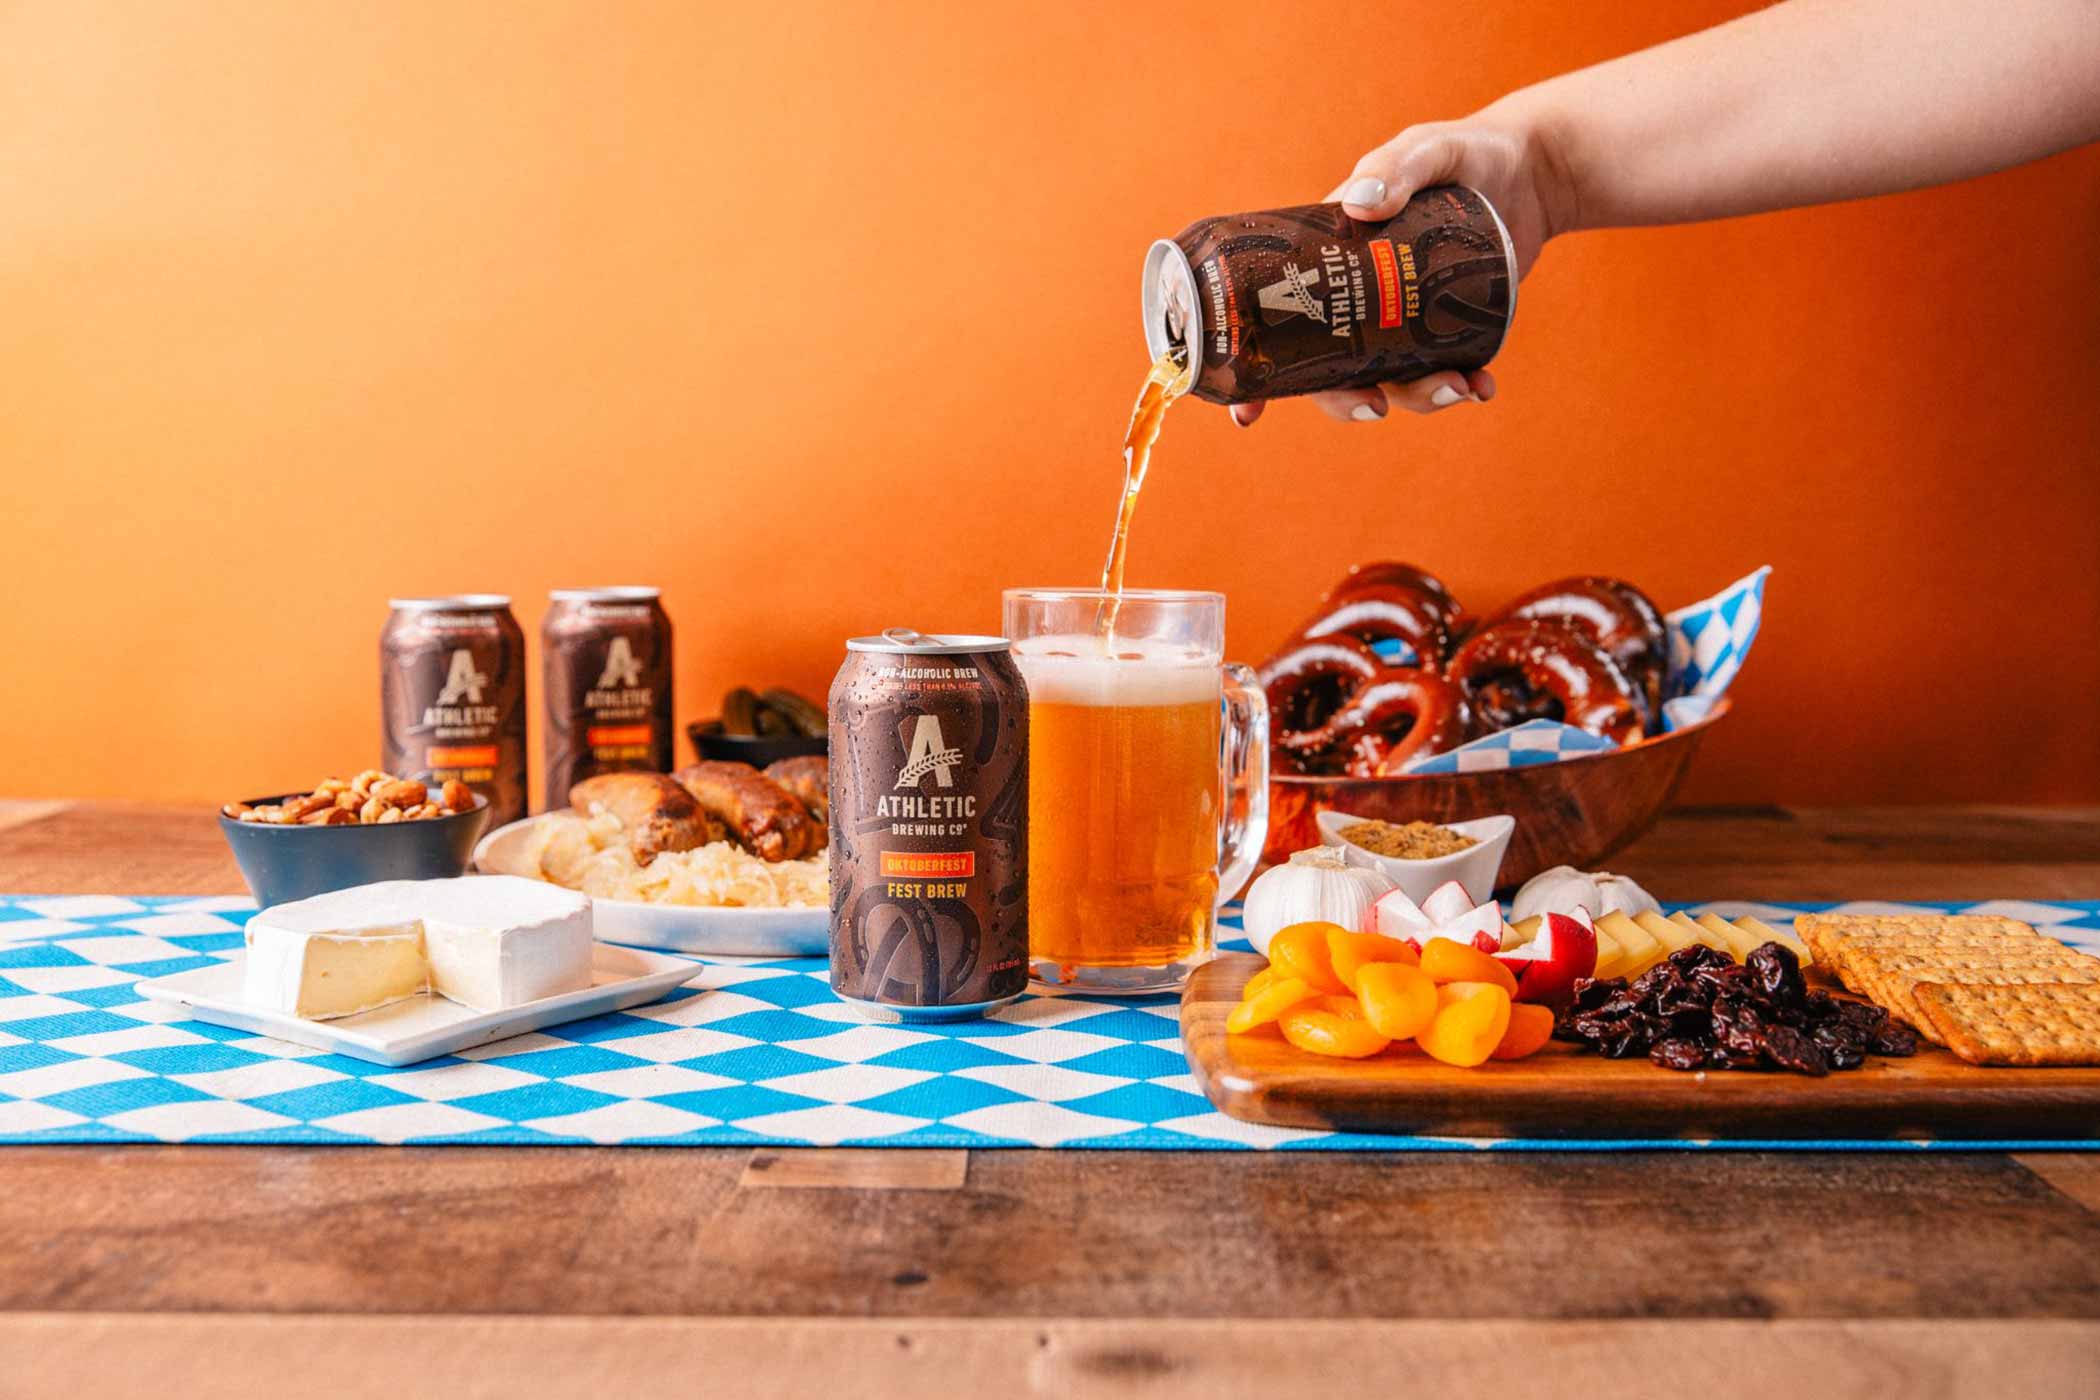 5-Minute Guide to Pairing Food With Oktoberfest Beers